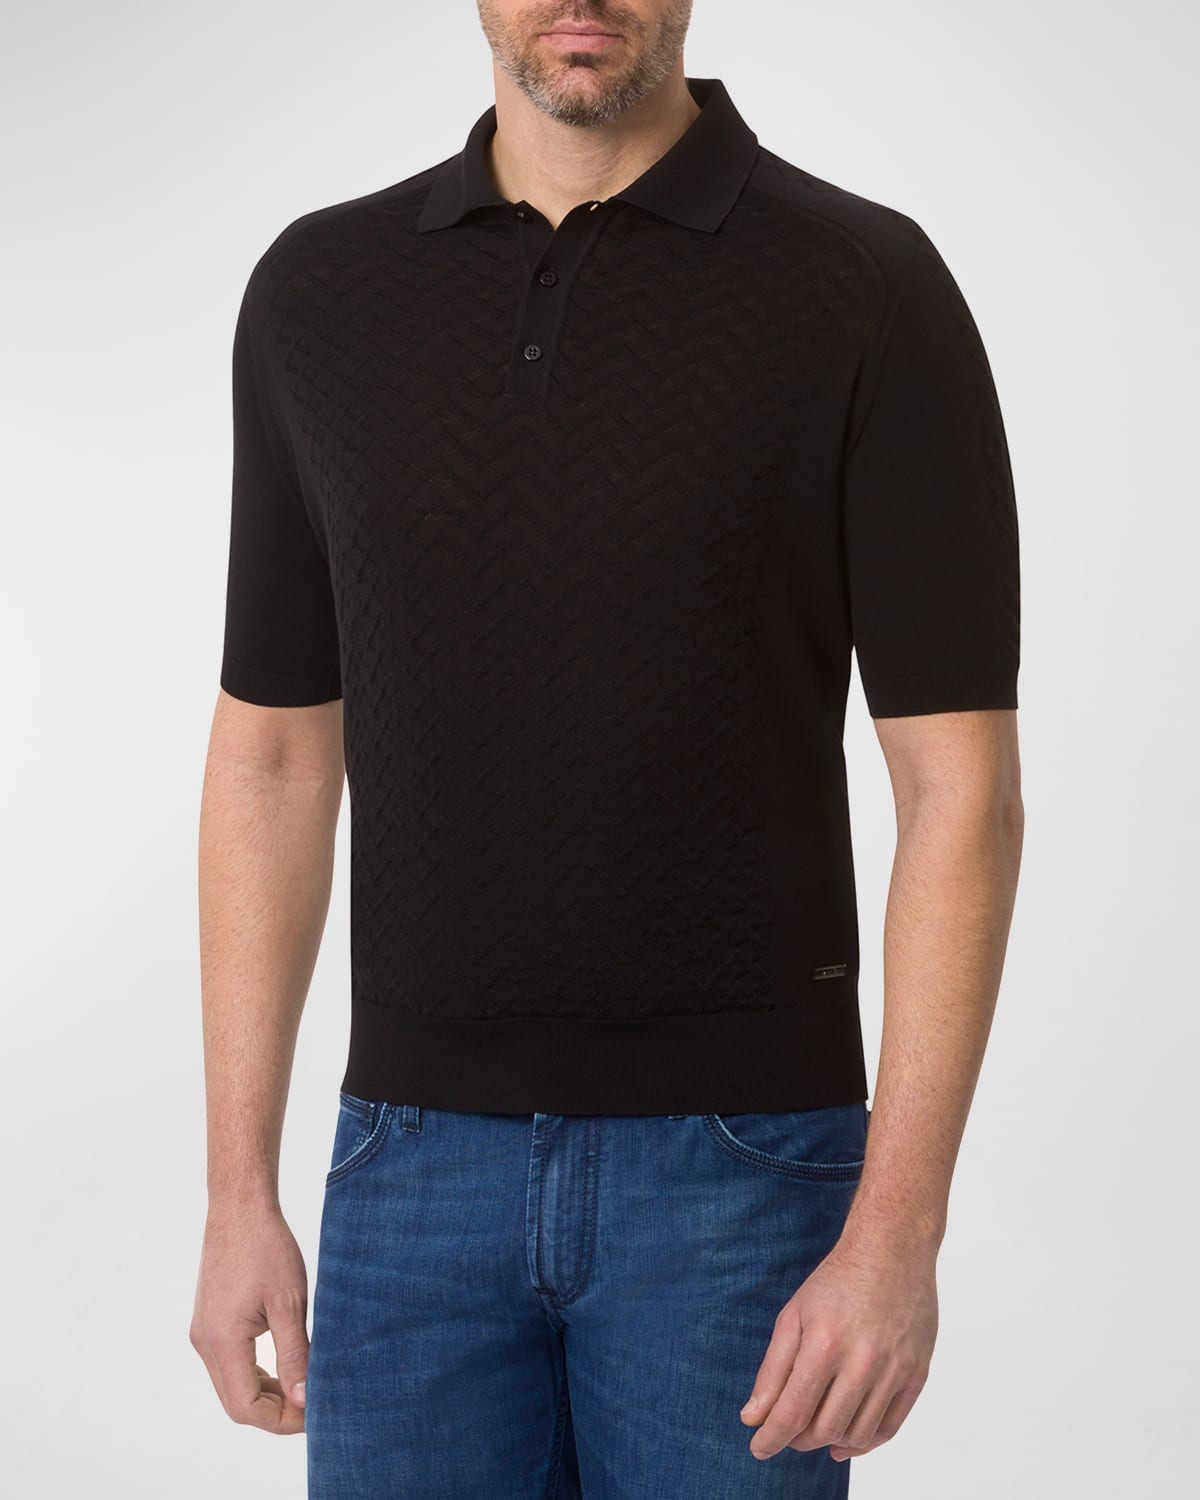 Men's Patterned Short-Sleeve Polo Sweater